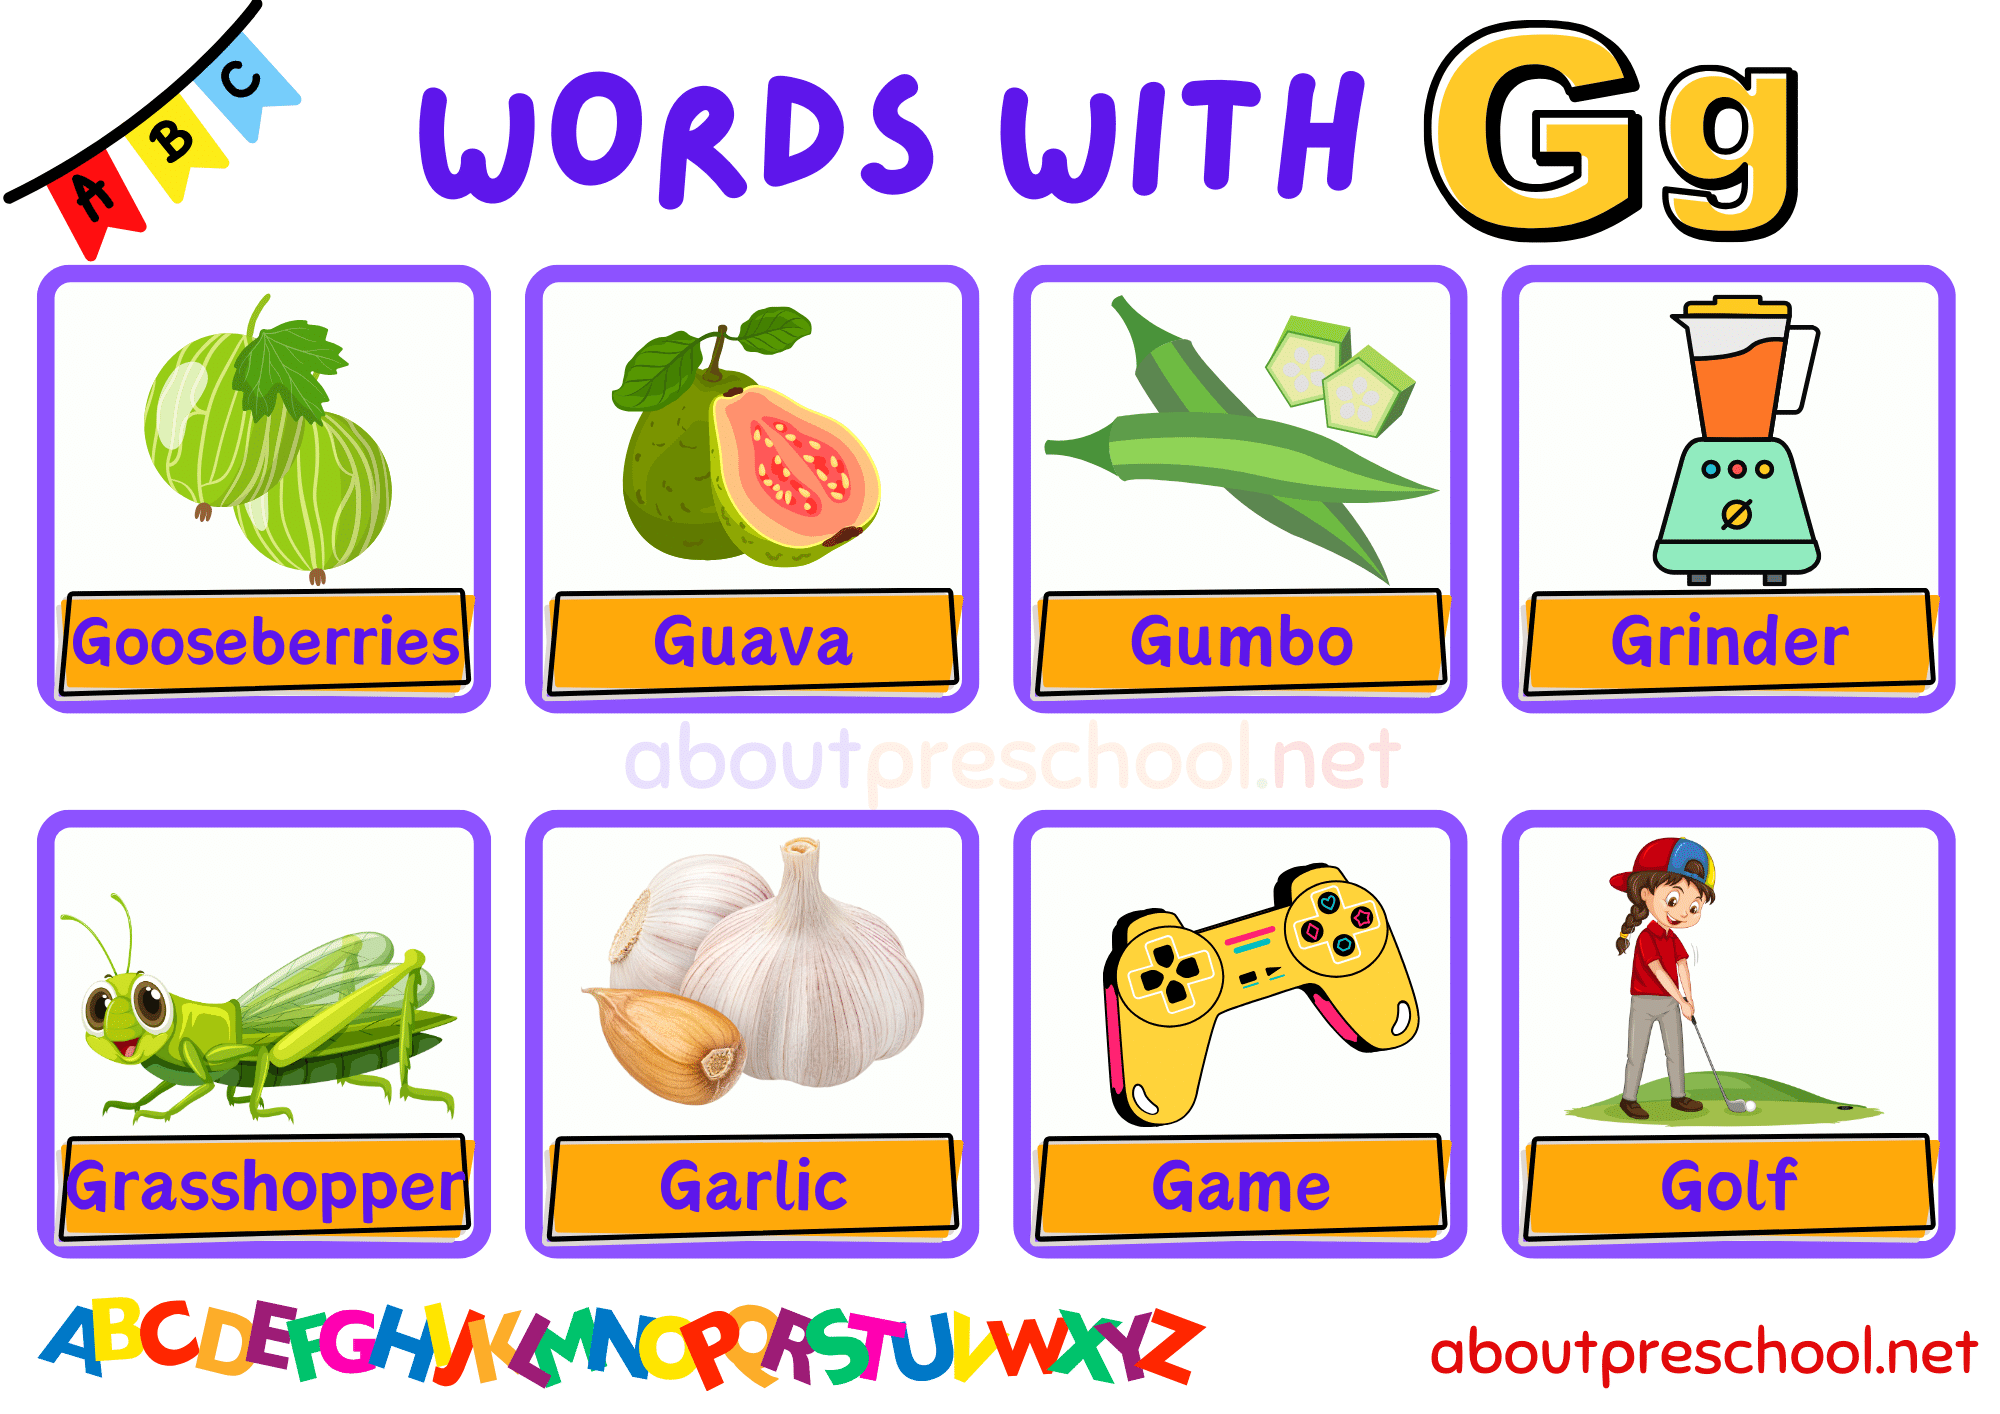 Words With G